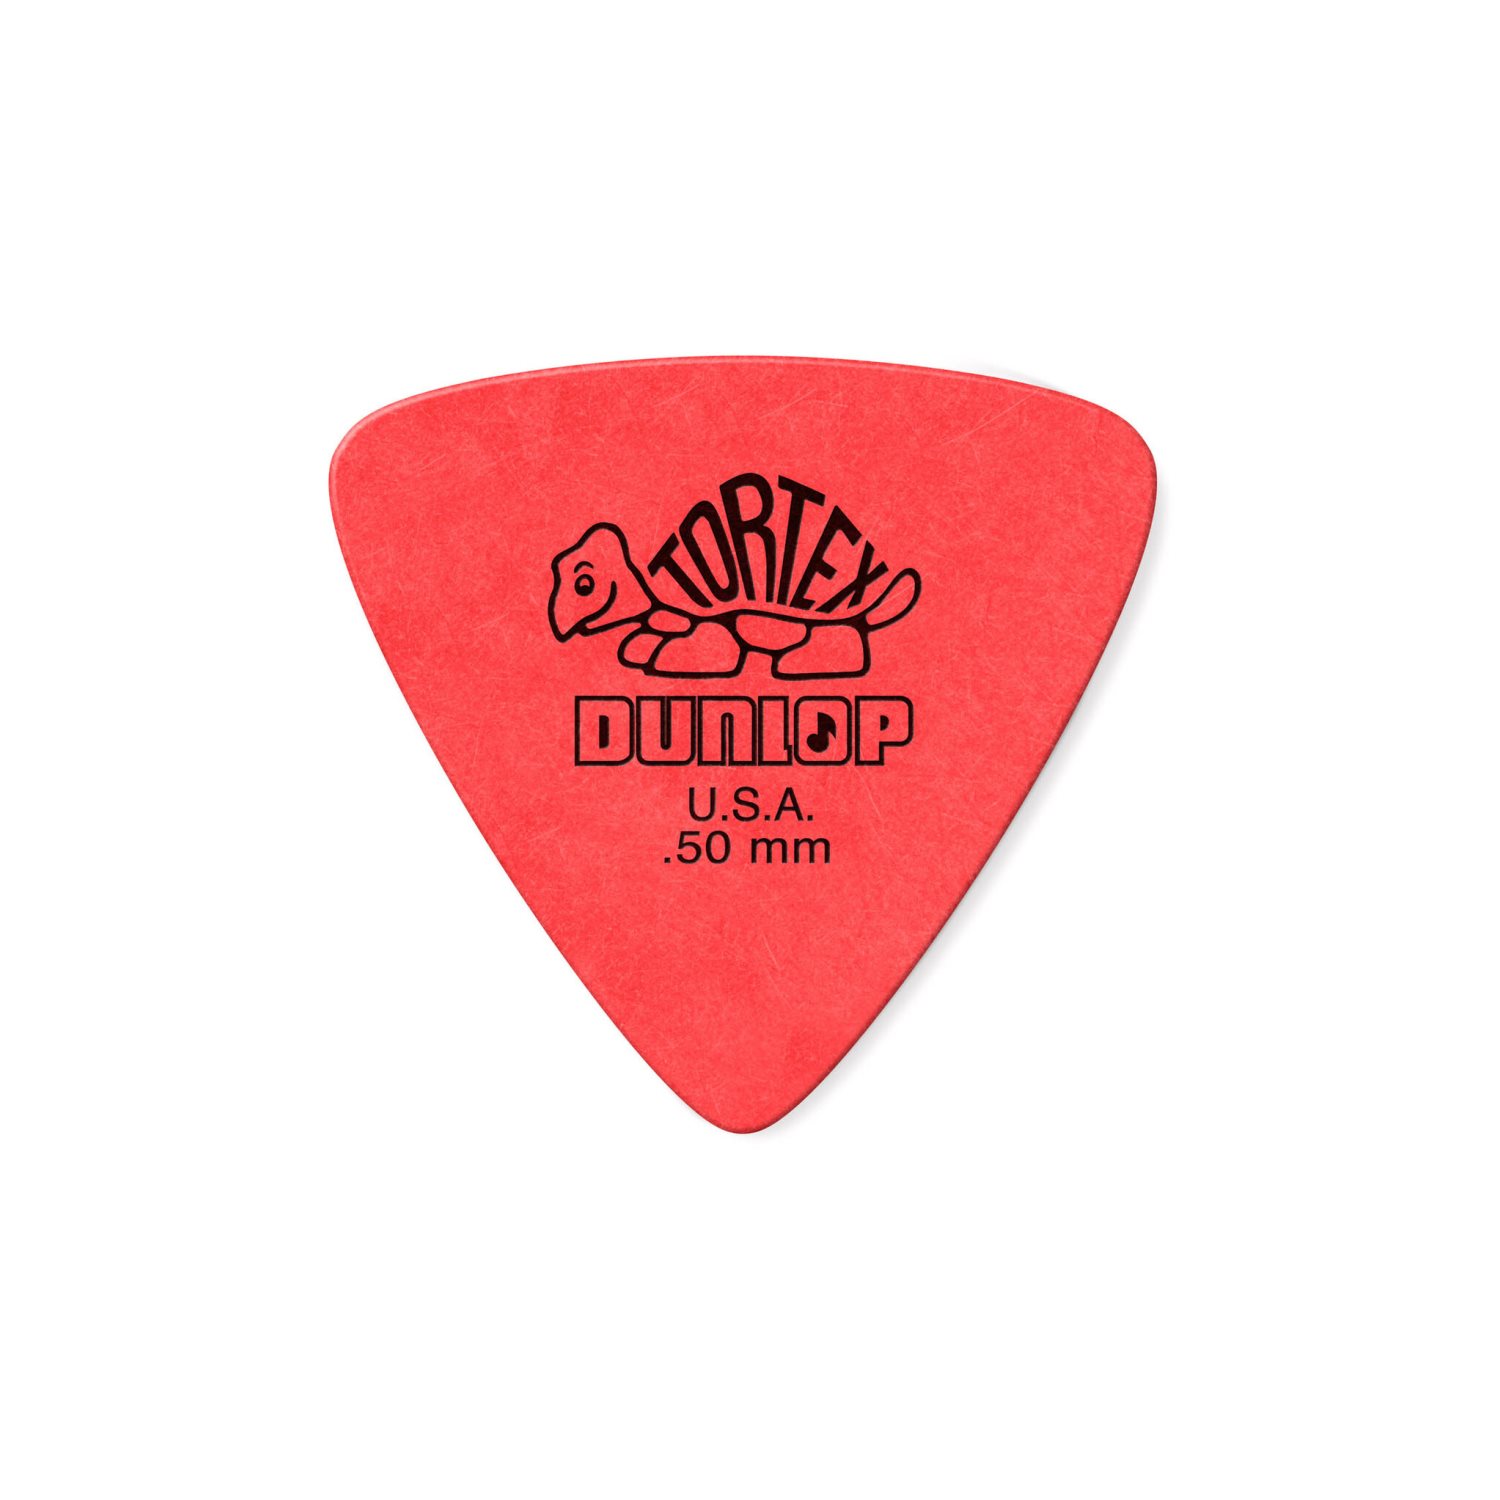 DUNLOP - 431P.50 - Tortex Triangle Pick Player's Pack (6 Pack) - 0.5 mm